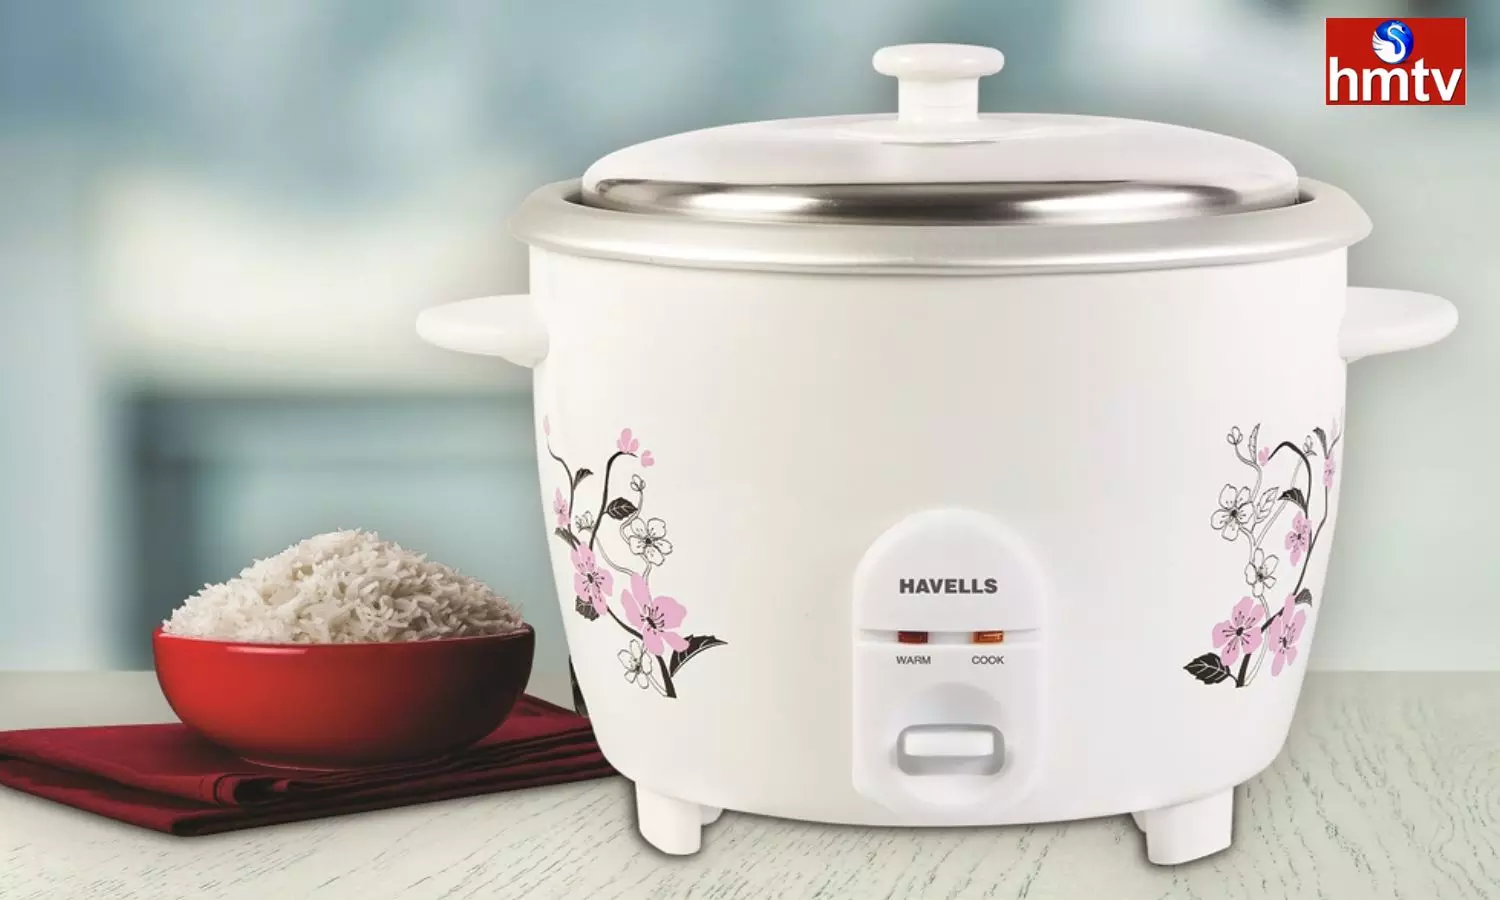 Are you cooking rice in an electric cooker the risk of these diseases is high